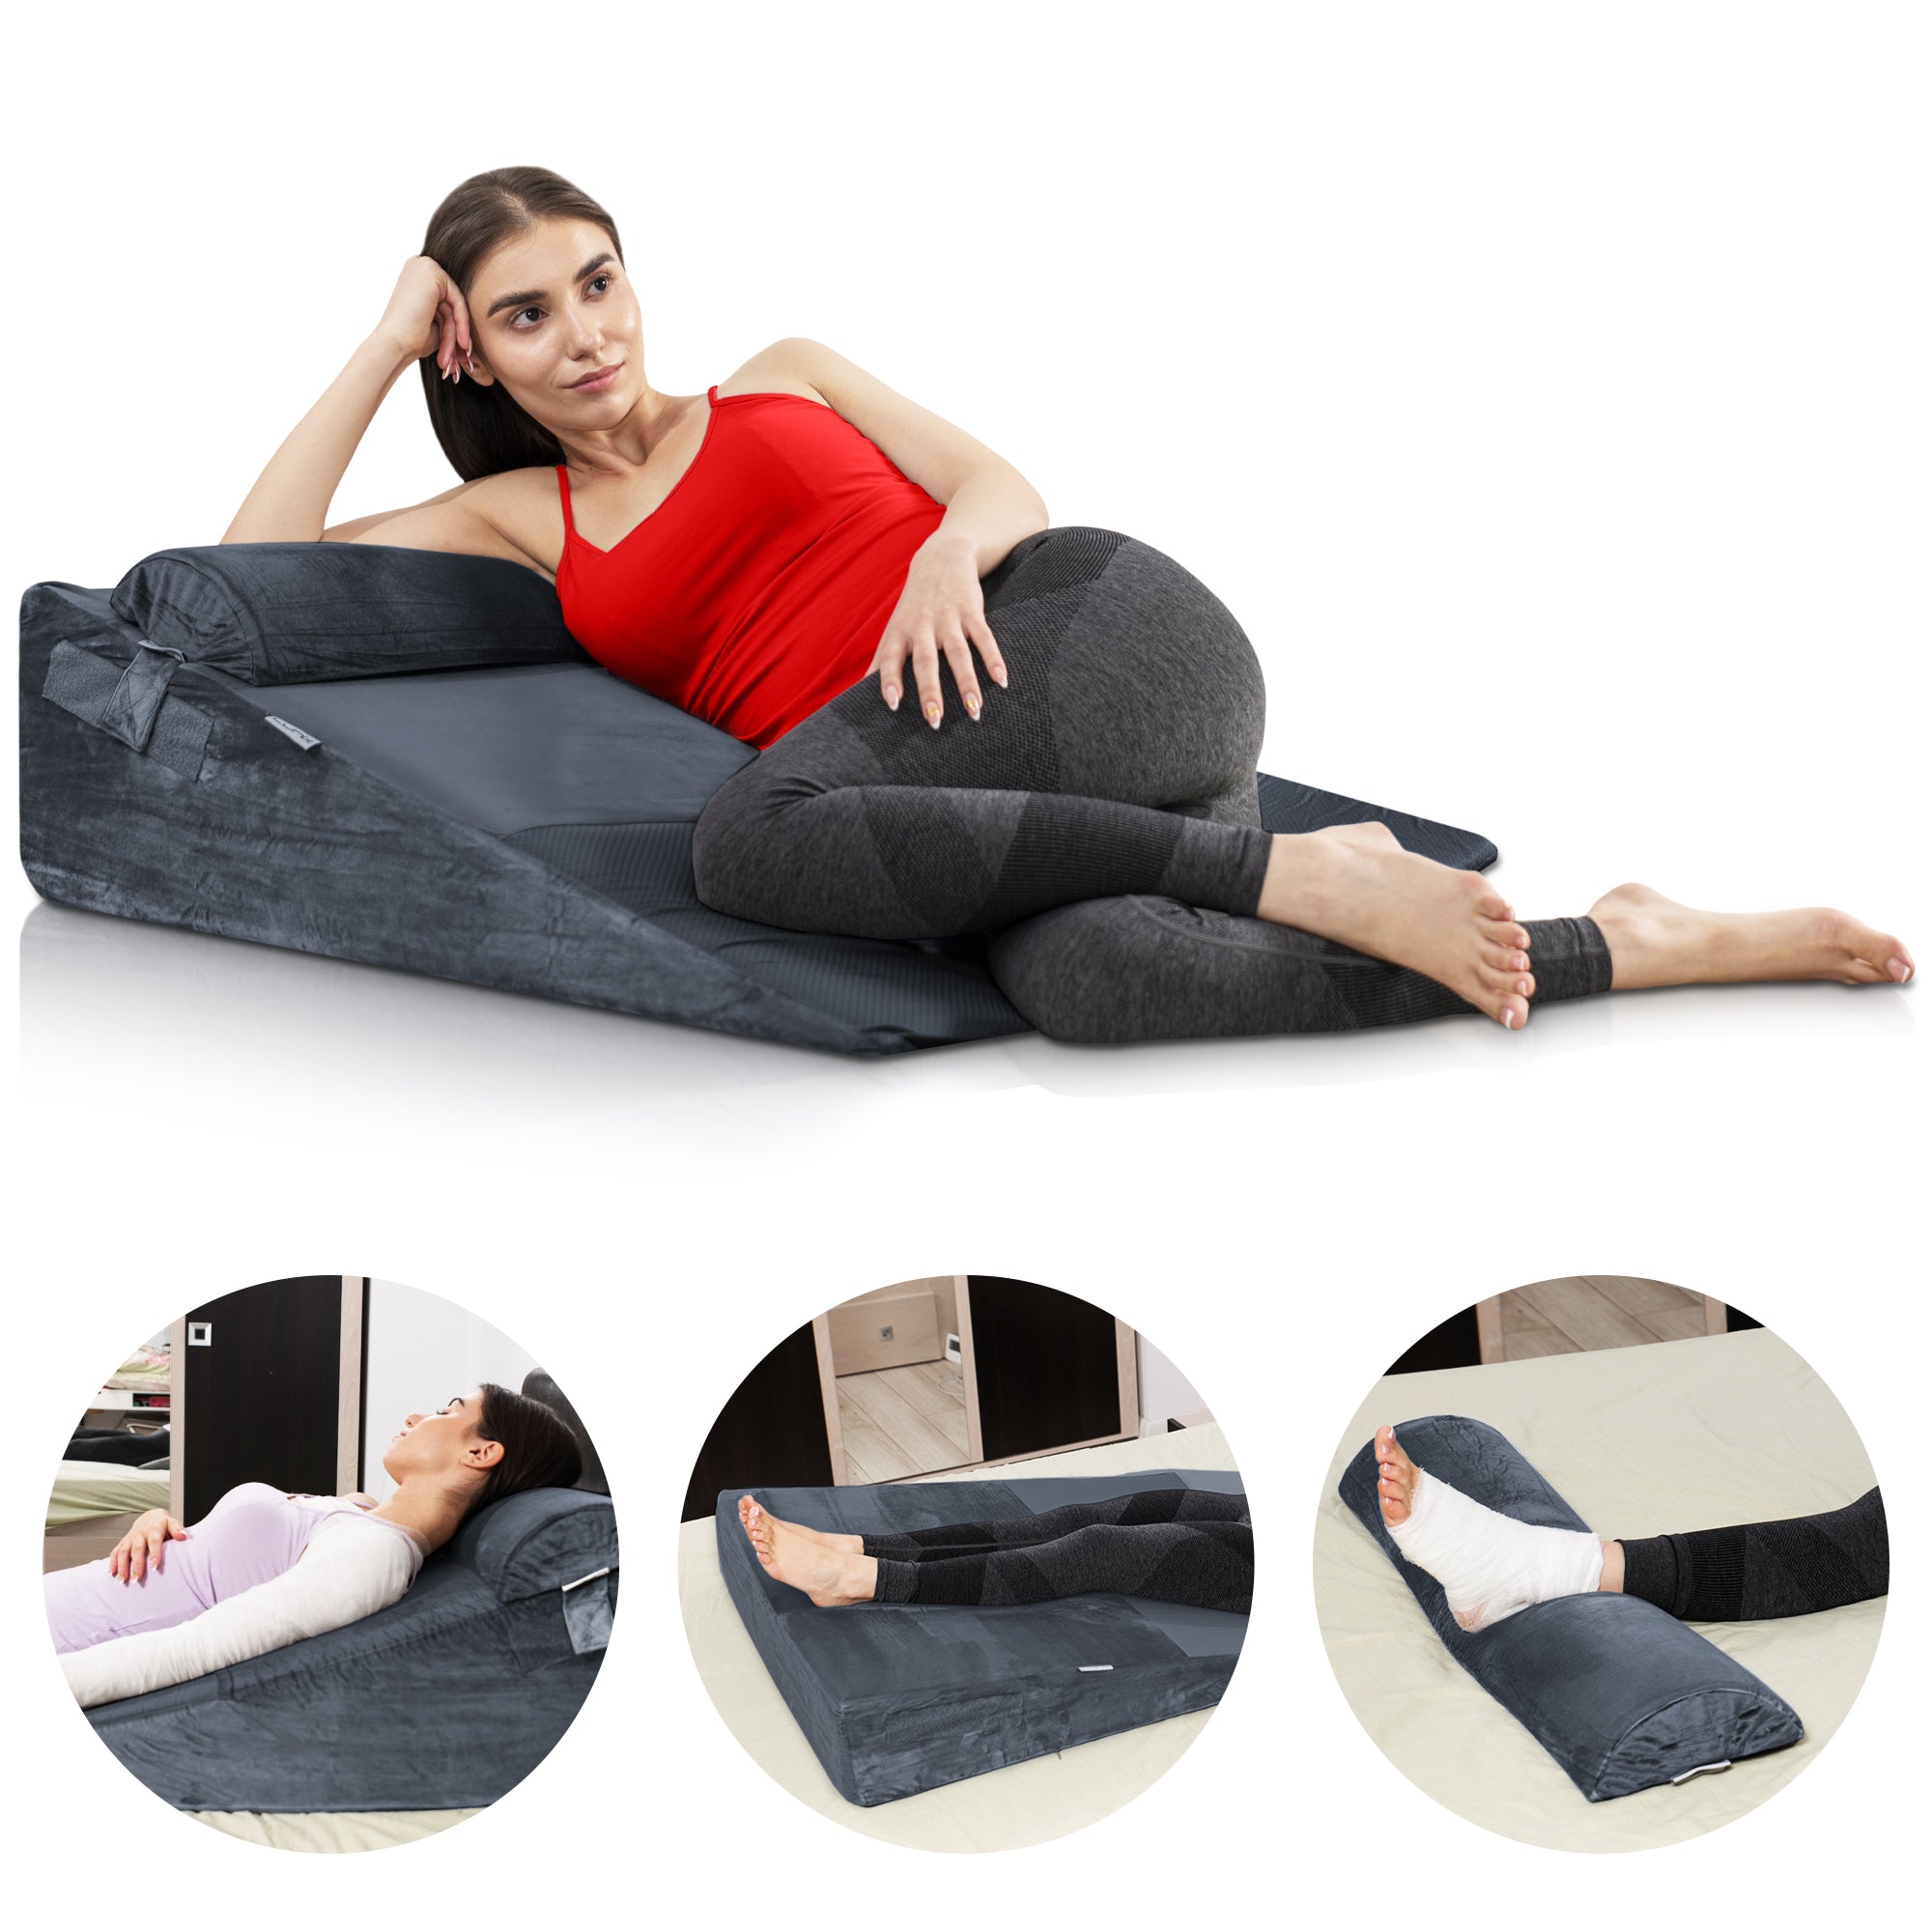 LX13 6pcs Orthopedic Bed Wedge Pillow System, with Hot Cold Pack White -  Lunixinc